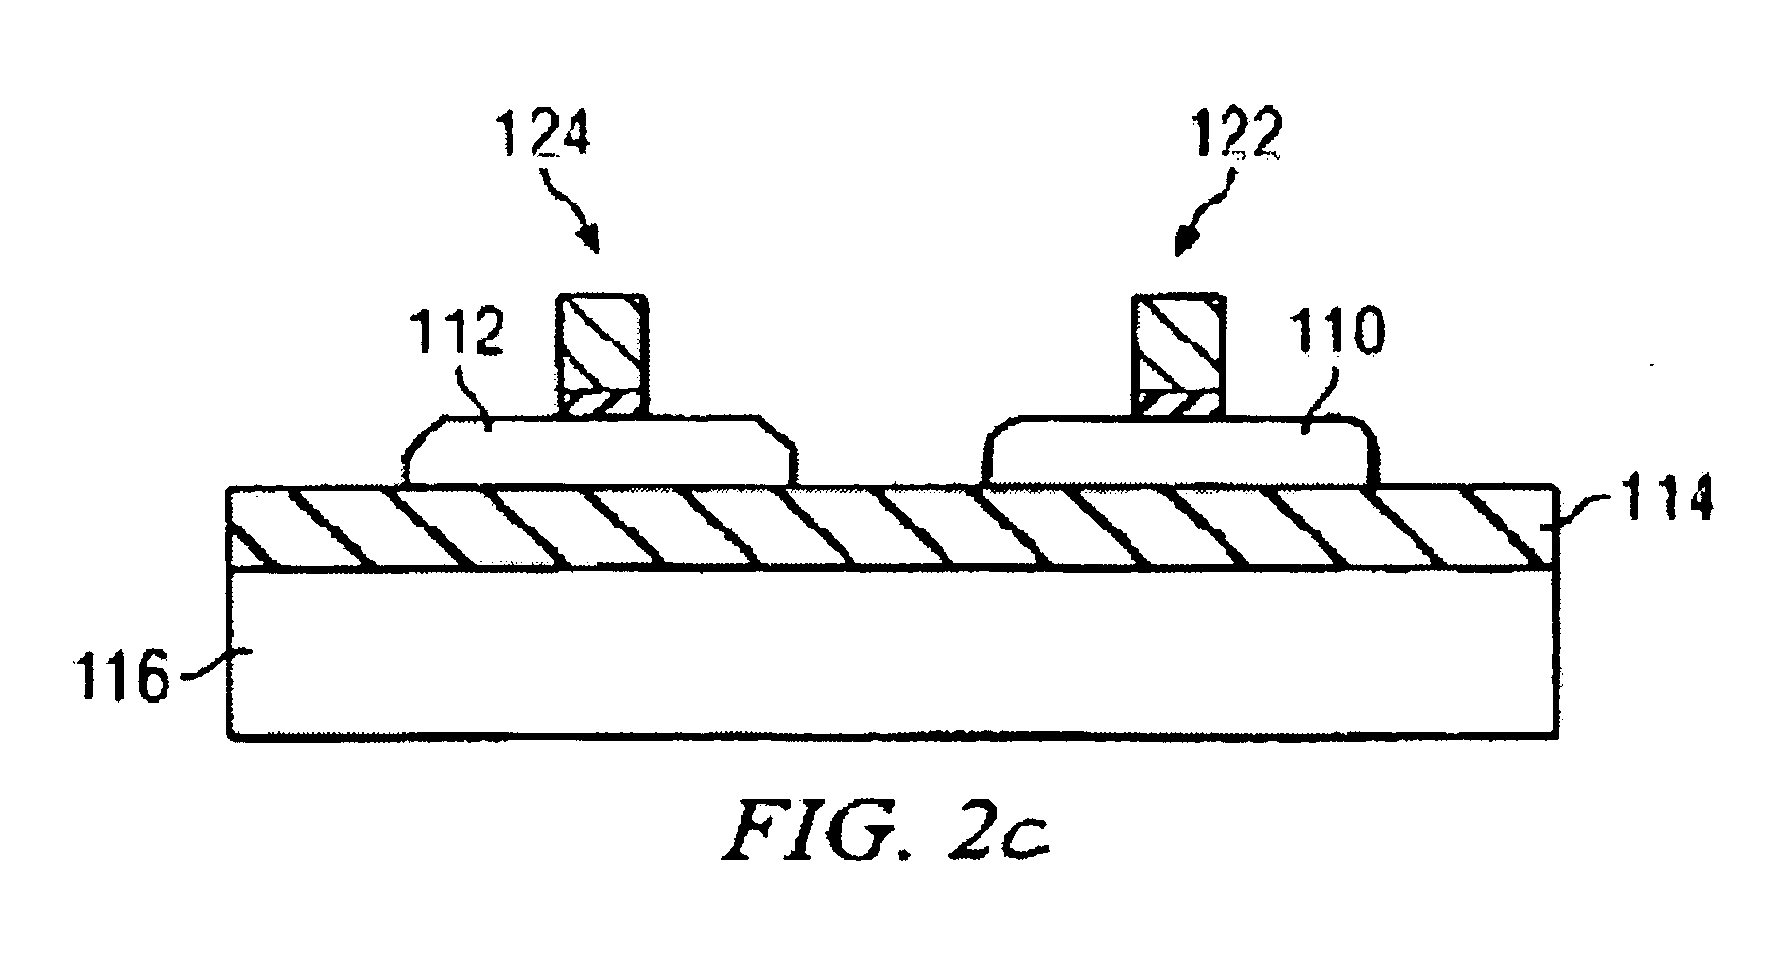 Silicon-on-insulator chip with multiple crystal orientations